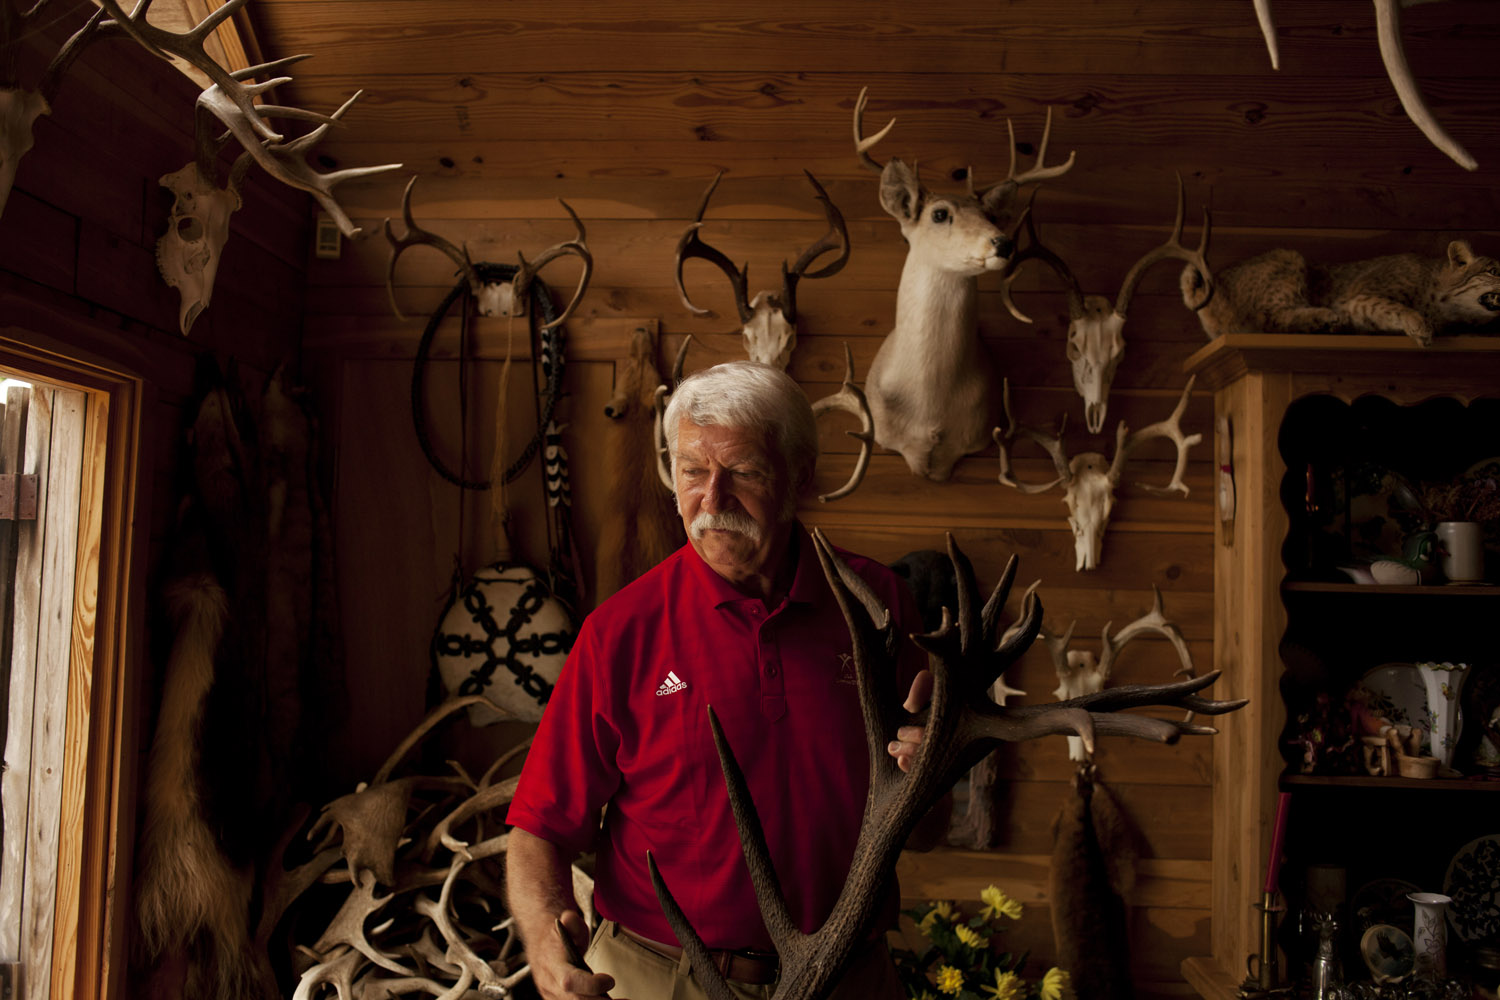 Bela Karolyi in his home. He is an avid hunter and his walls display many hunting trophies.